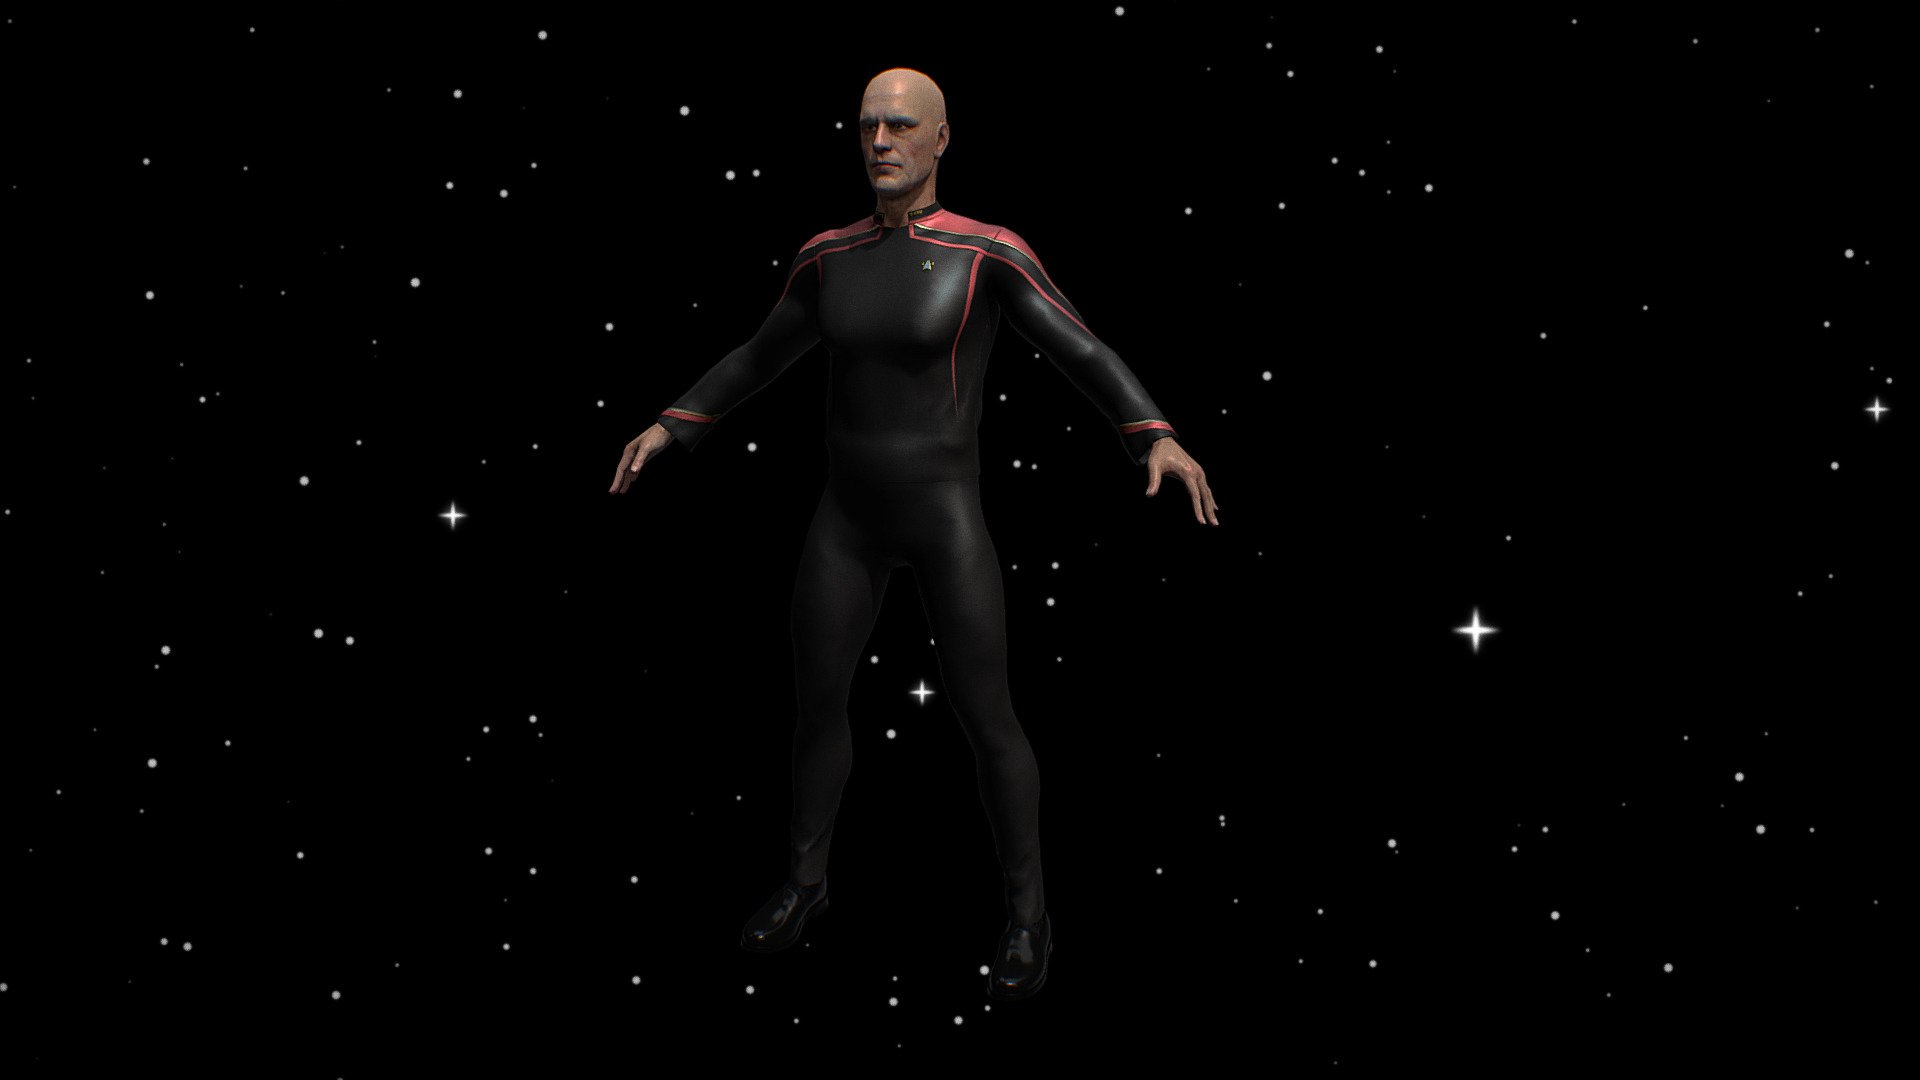 This is a custom star trek admiral model inspired by Admiral Picard from the star trek series,  made for the UE4 mannequin rig.

Please keep in mind this model is still in development and does not show the final result - [UE4] Star Trek Admiral (Male) - 3D model by SanForge Studio (@SanForge) 3d model